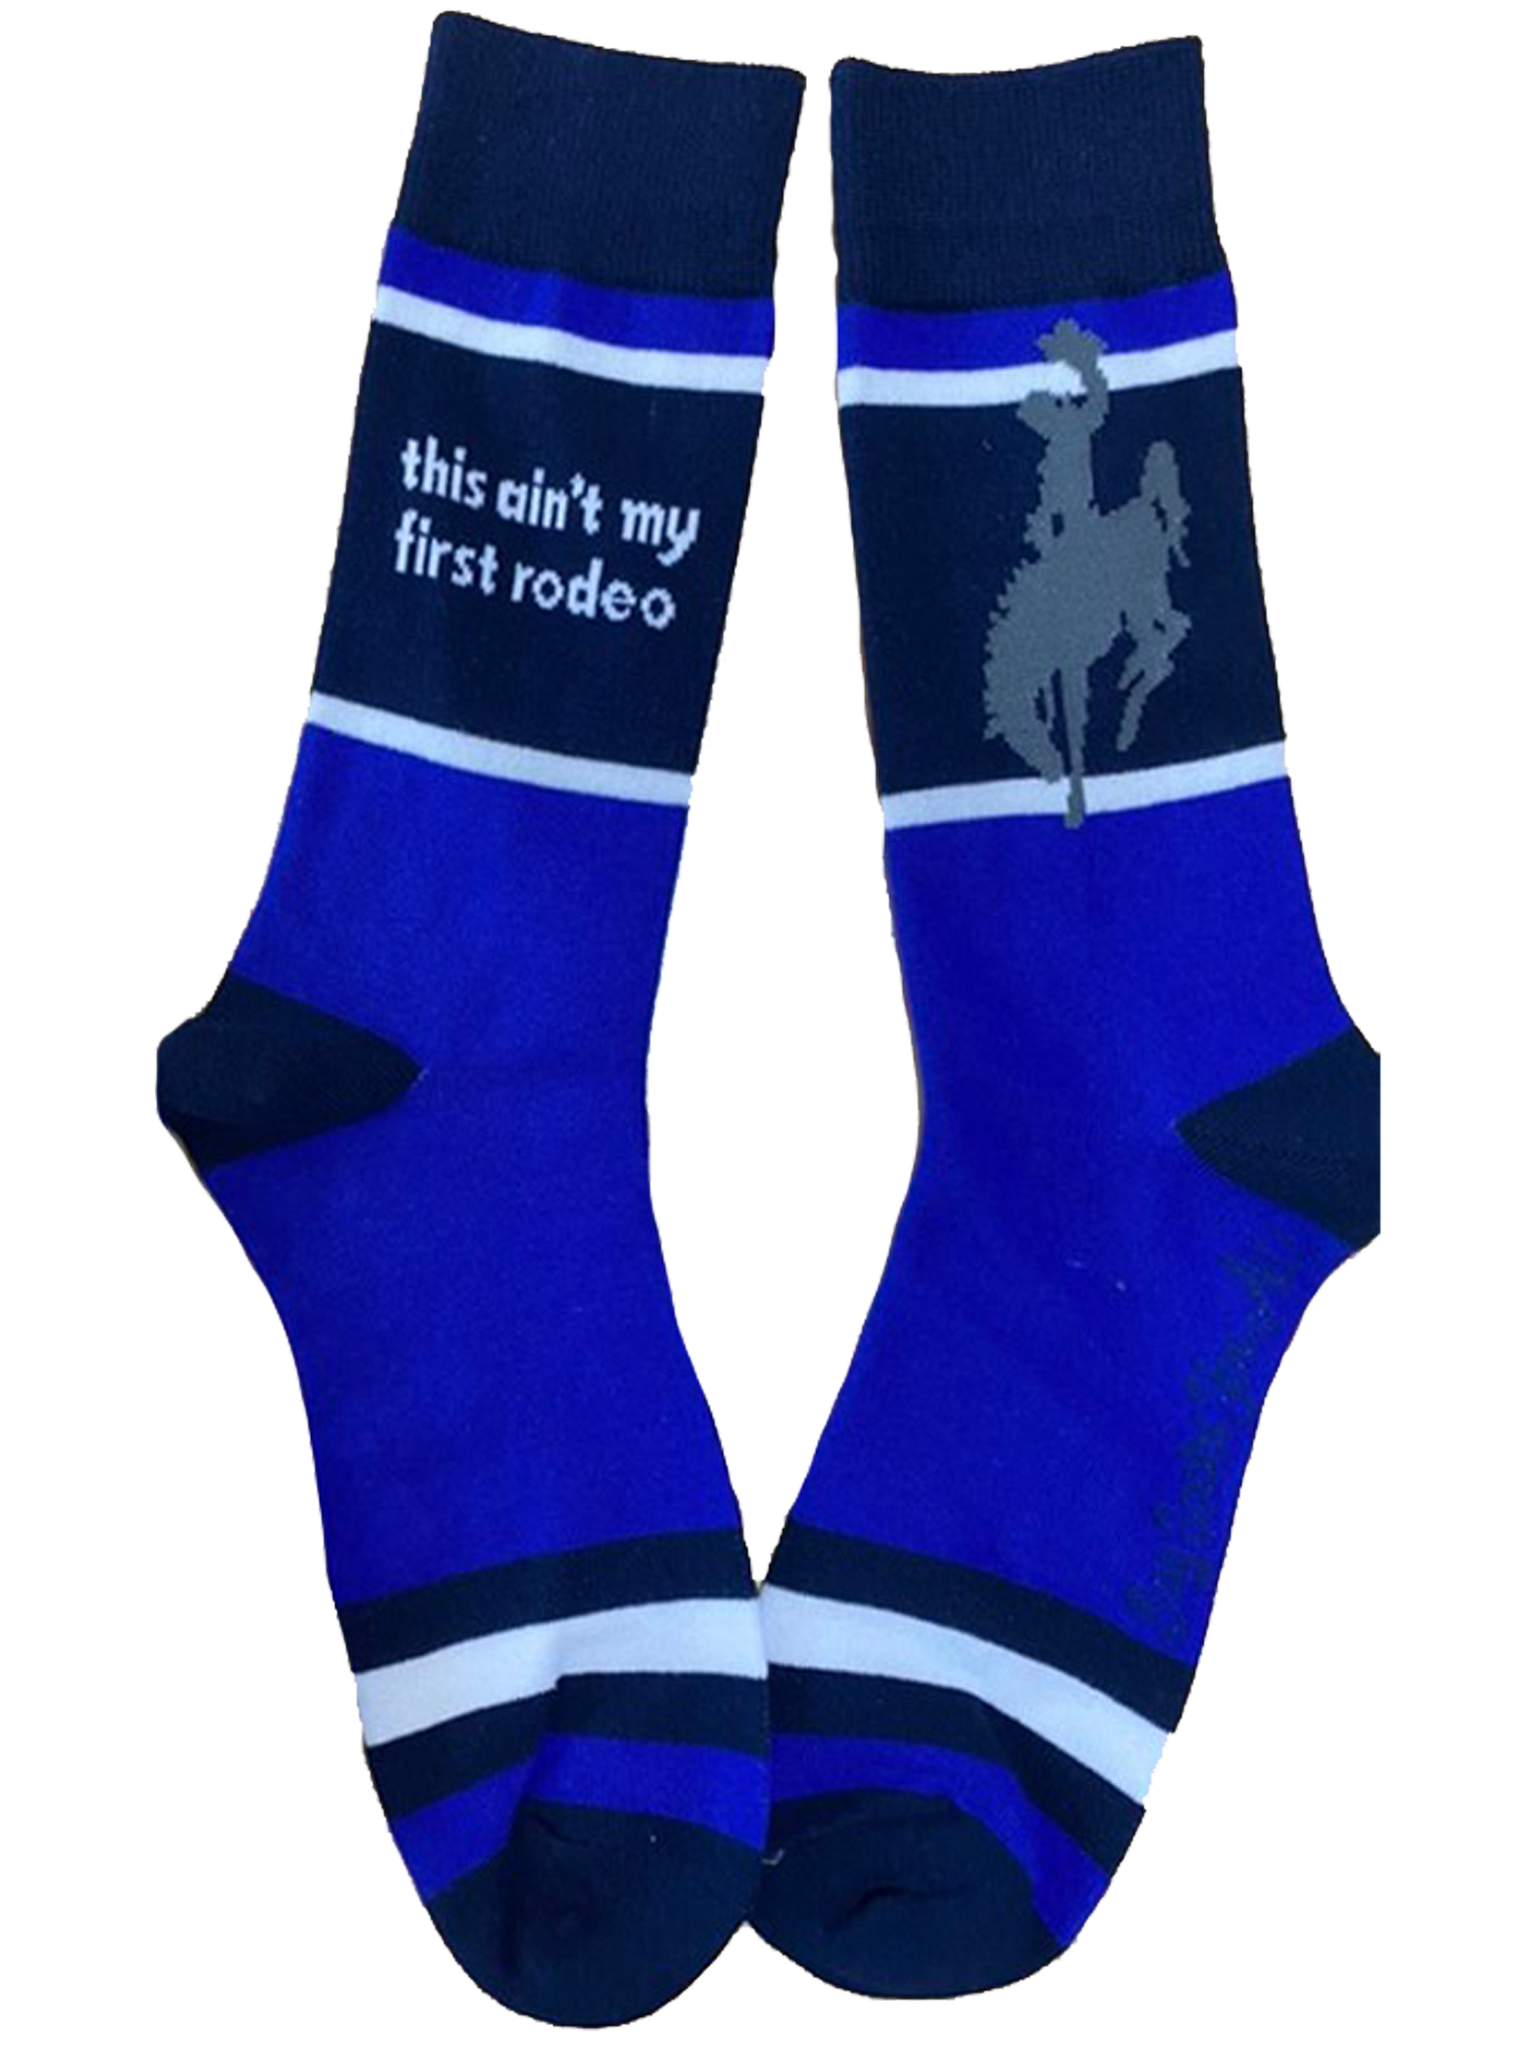 This Ain't My First Rodeo Men's Socks